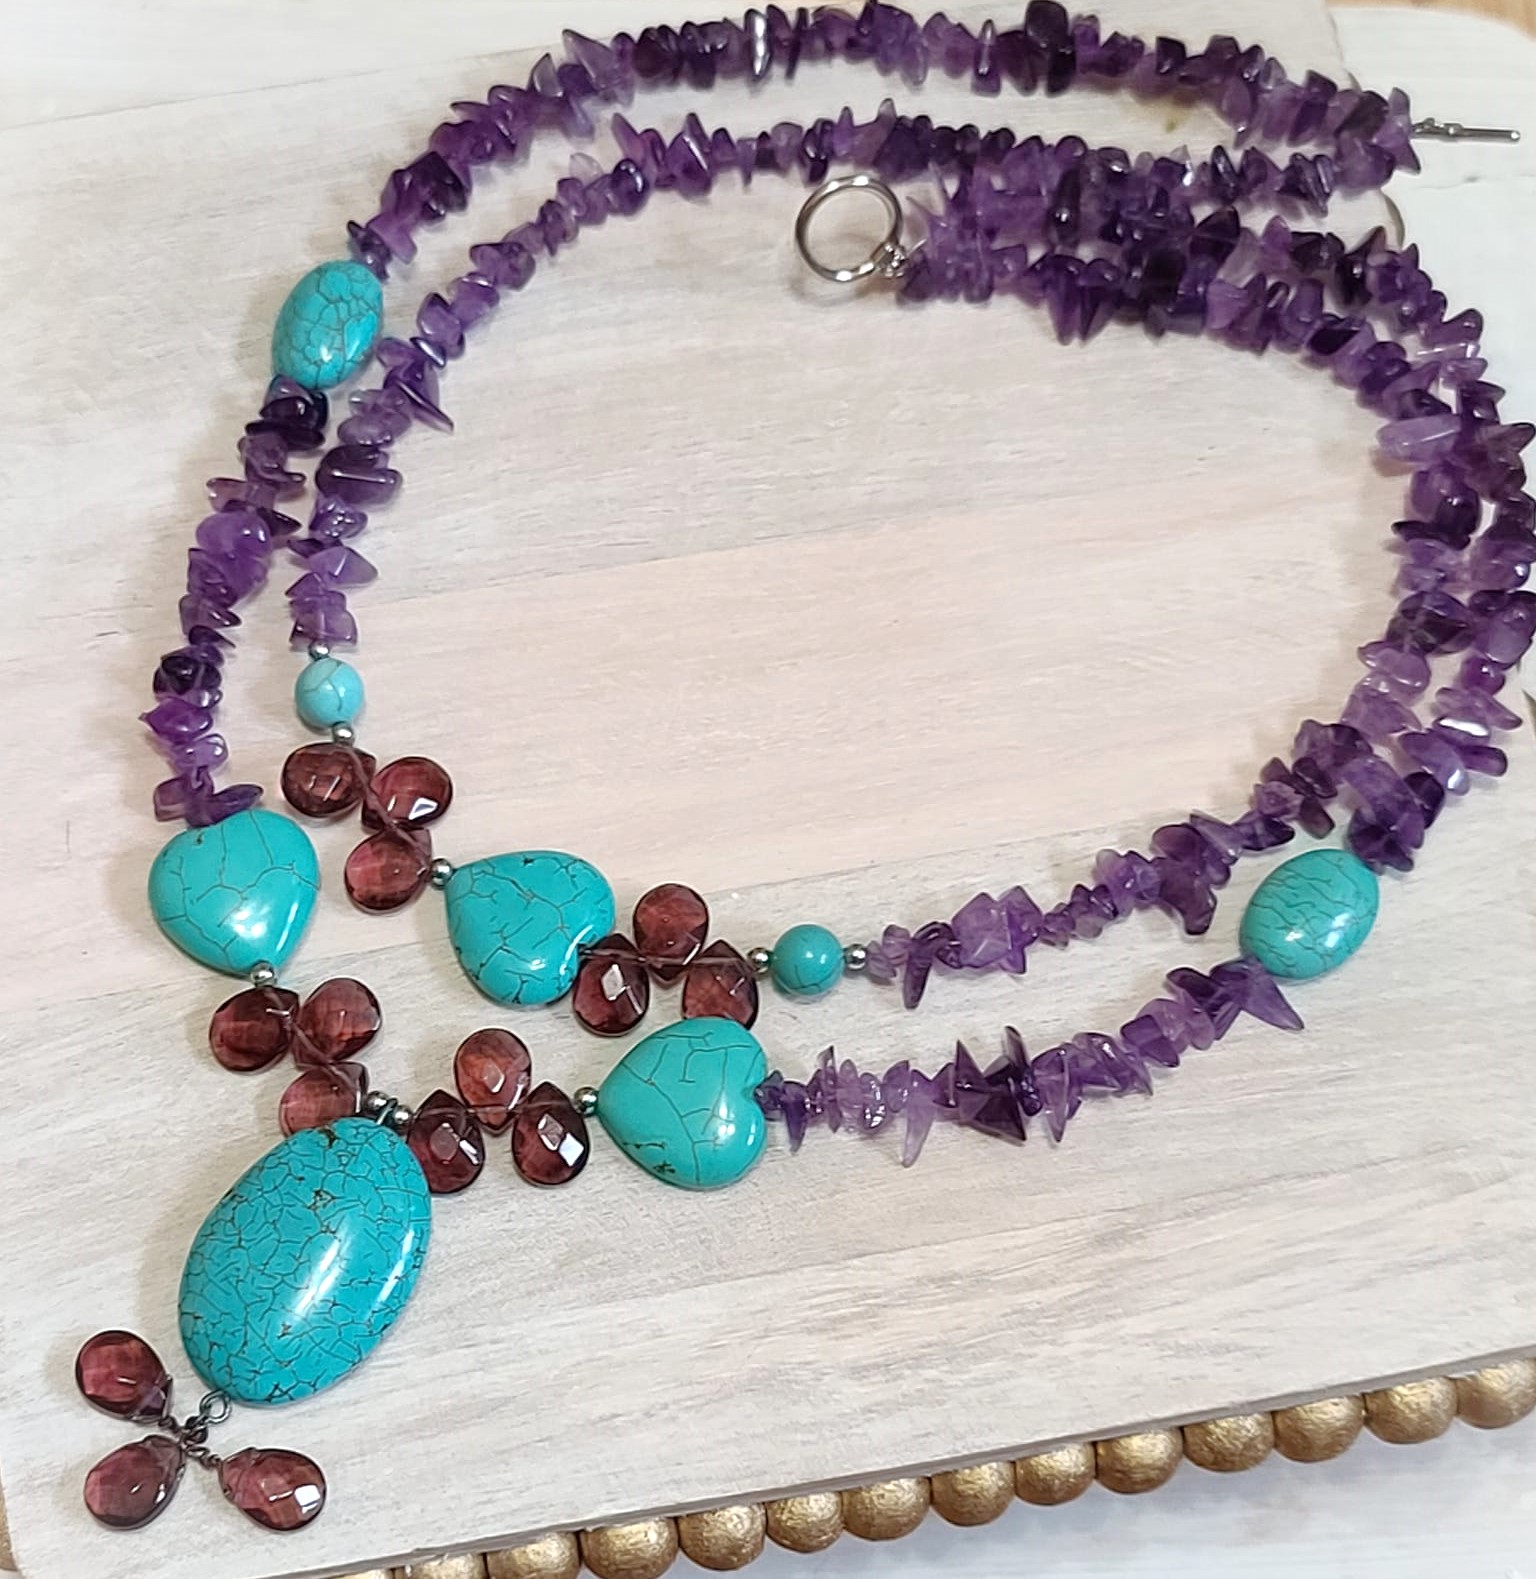 Amethyst Chips, Turquoise and Garnet Gemstones 2 Tier Necklace